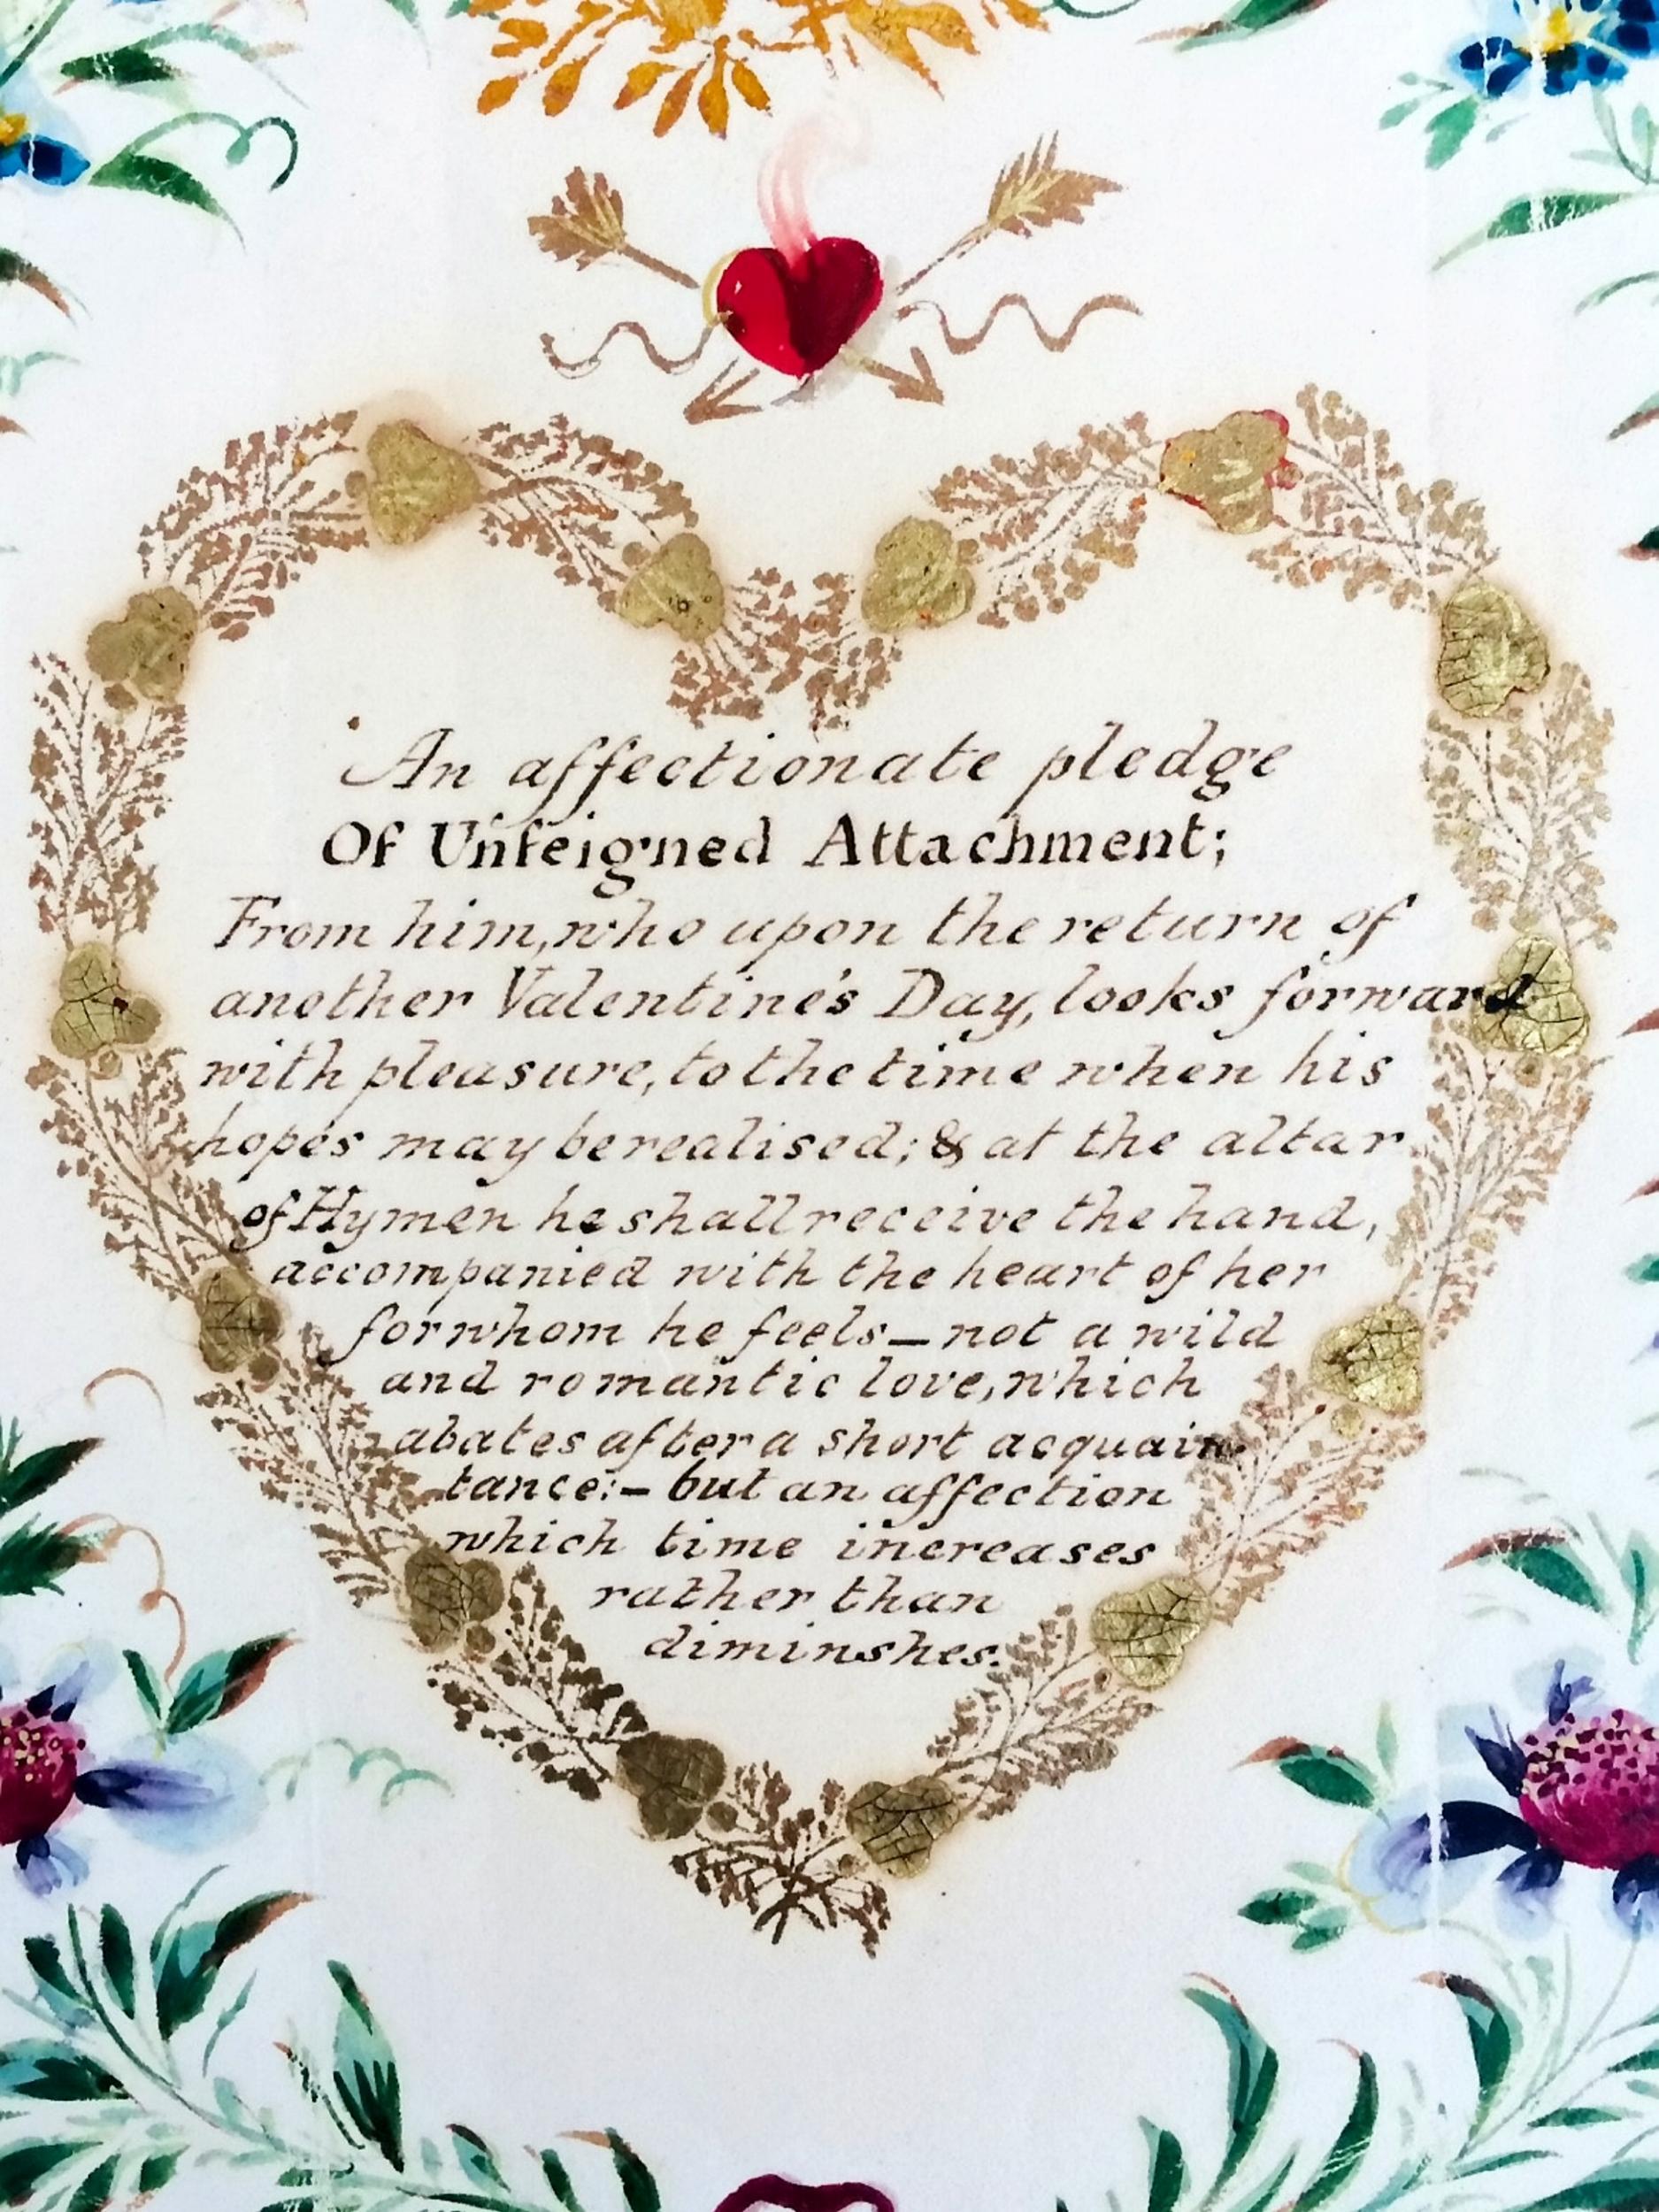 The love note was decorated with hand-painted with hearts, flowers and lovebirds (SWNS)